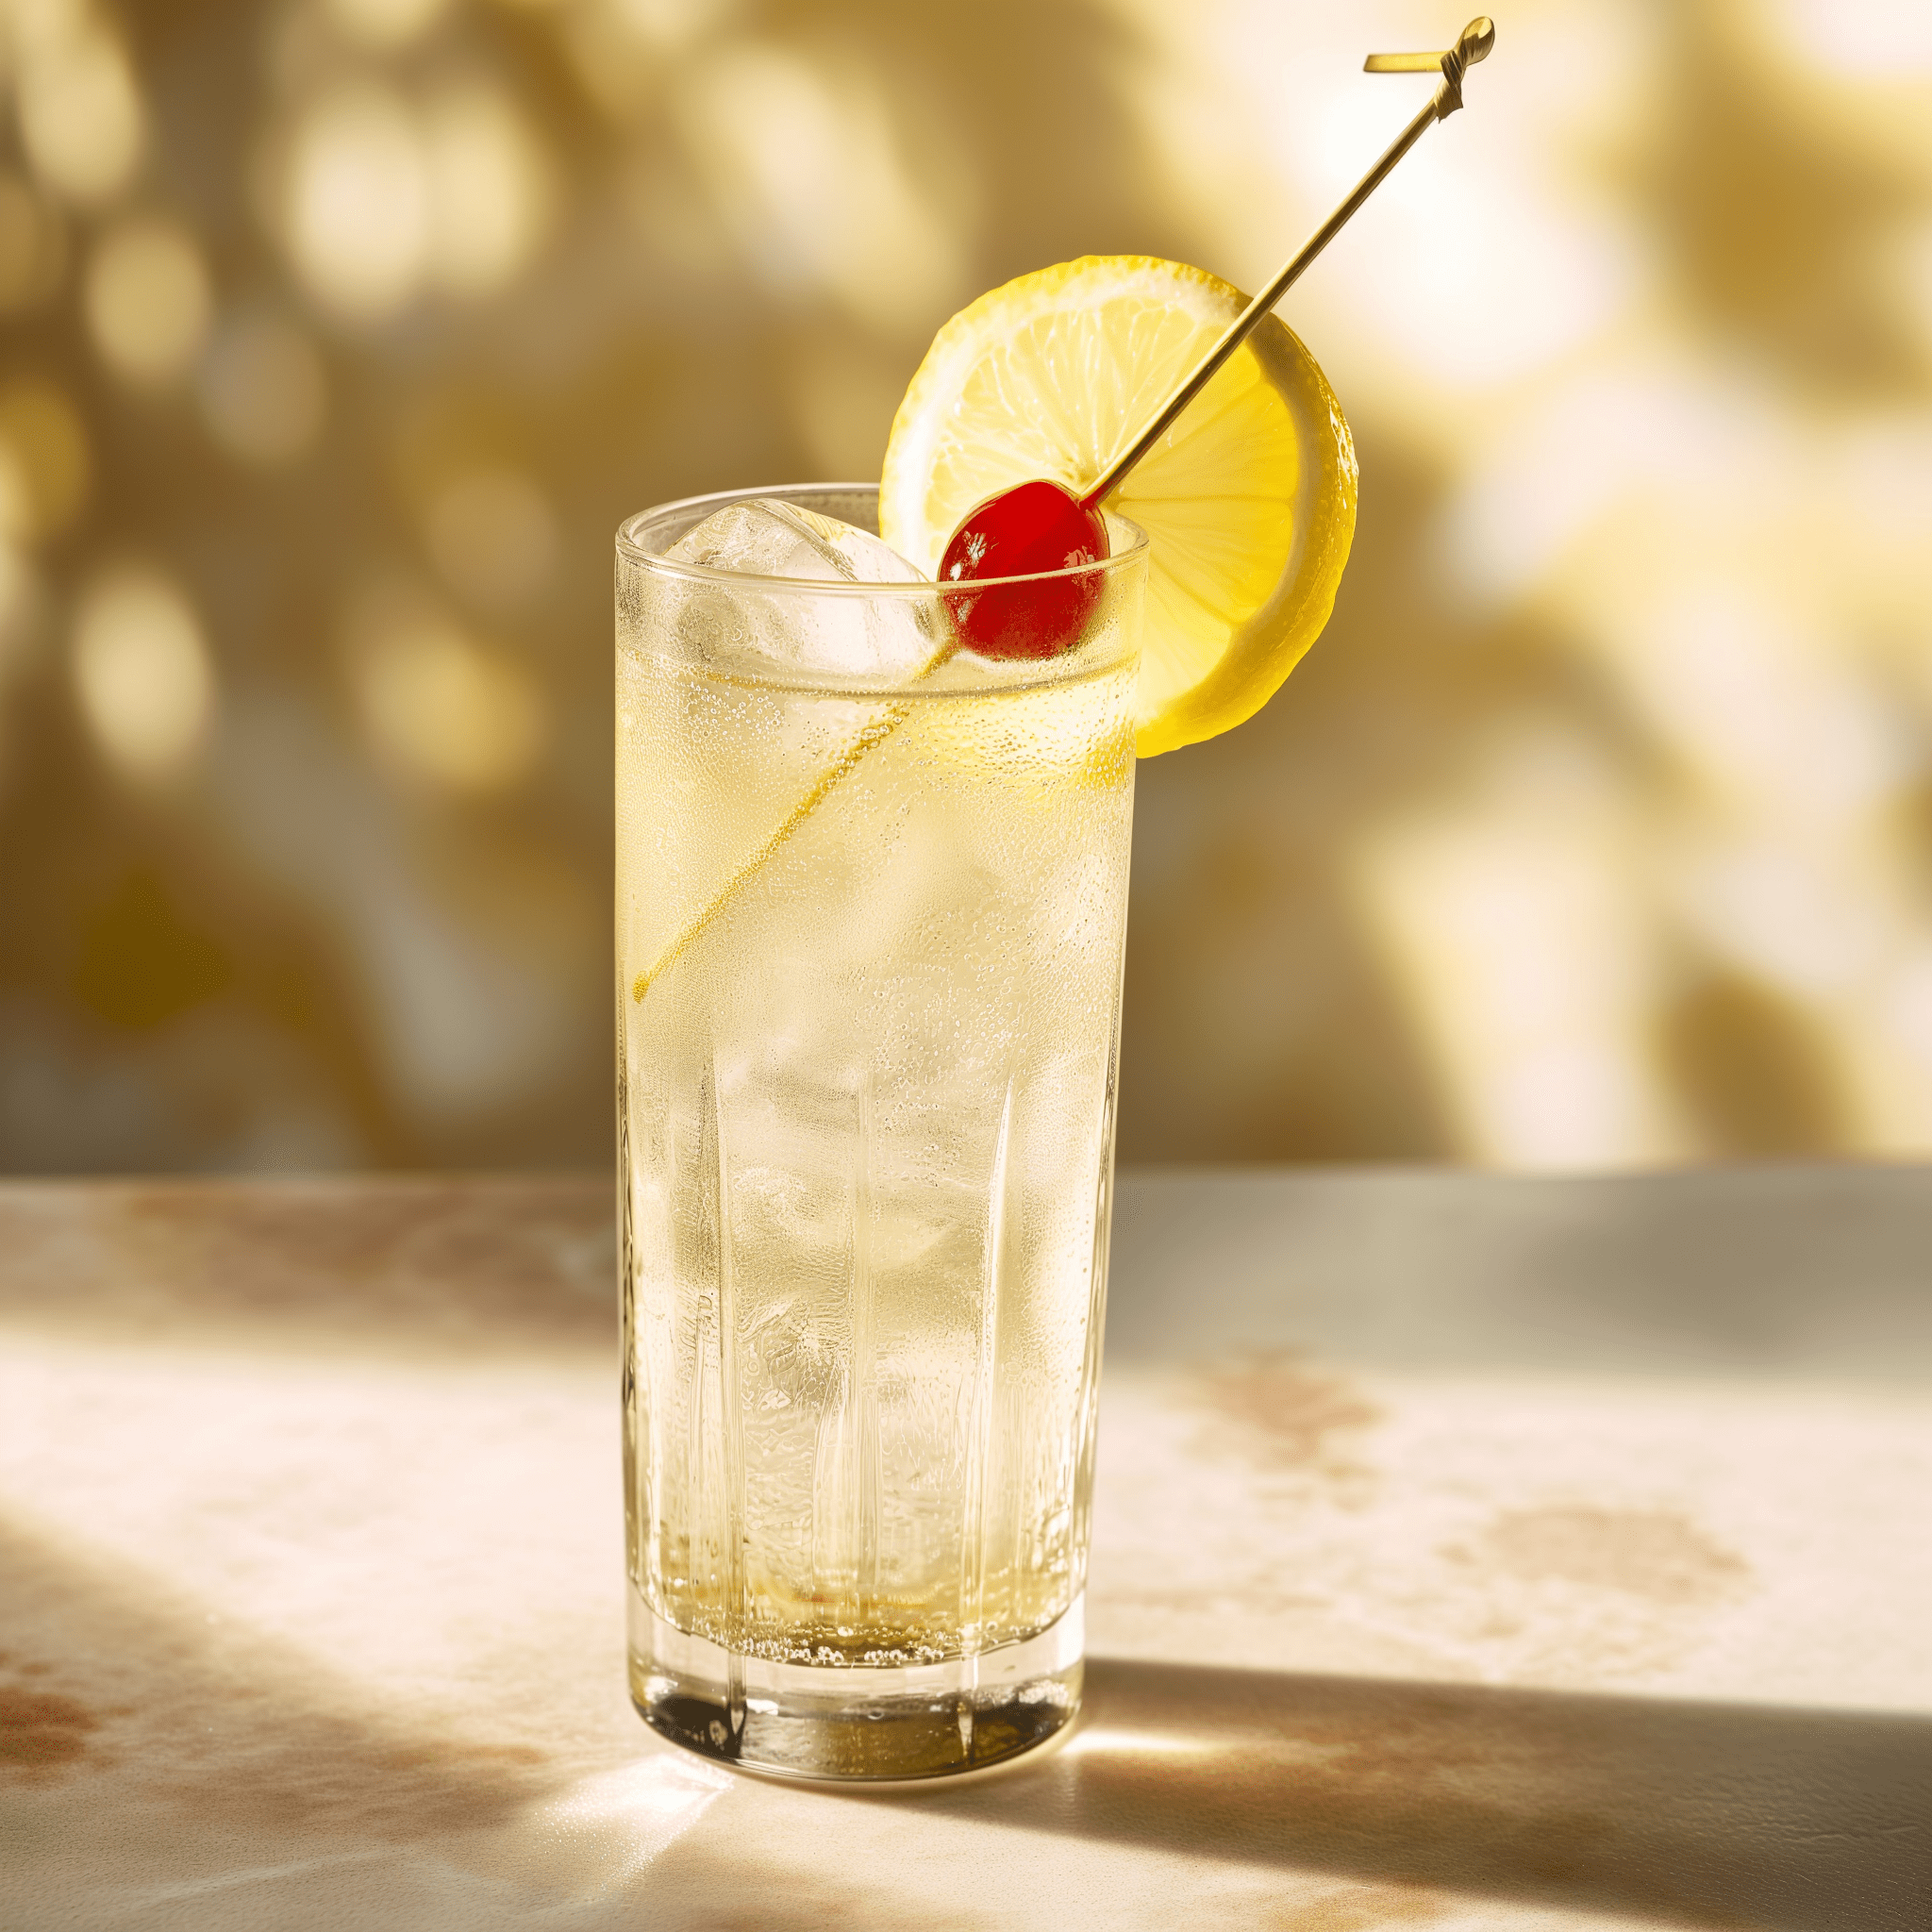 Virgin Tom Collins Recipe - The Virgin Tom Collins is a delightful mix of tart and sweet flavors, with a fizzy kick from the soda water. It's light, refreshing, and perfect for sipping on a hot day.